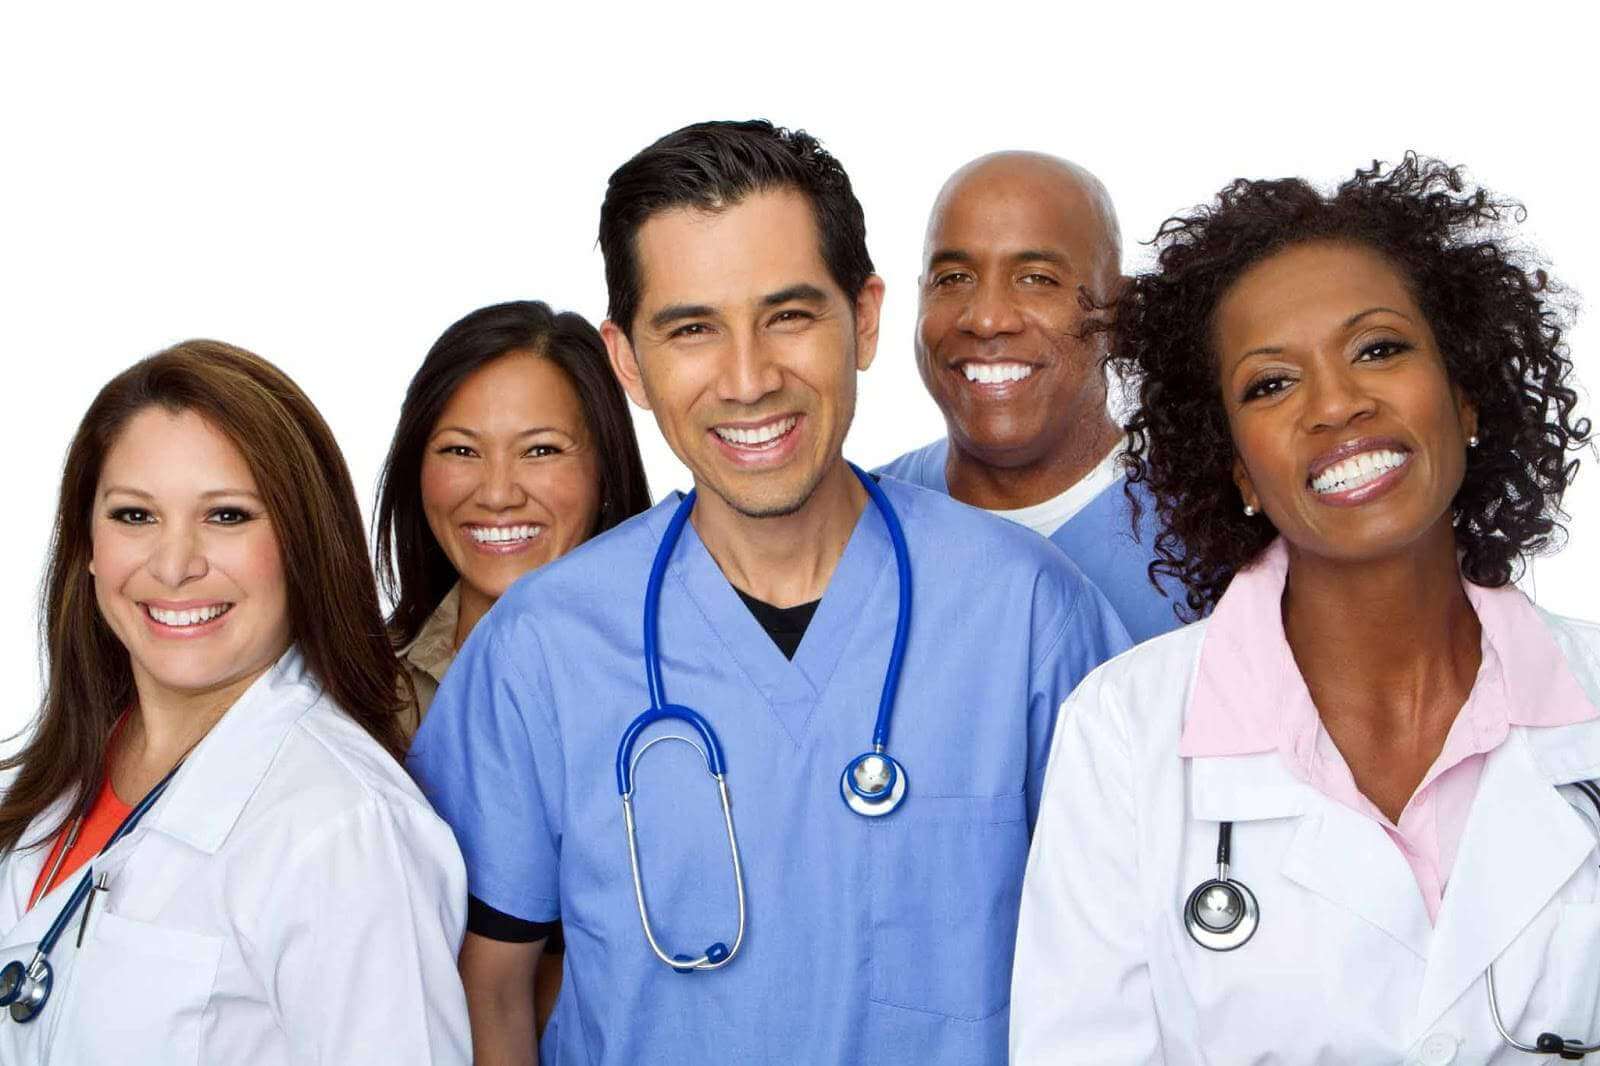 Workers’ Comp For Healthcare Staff